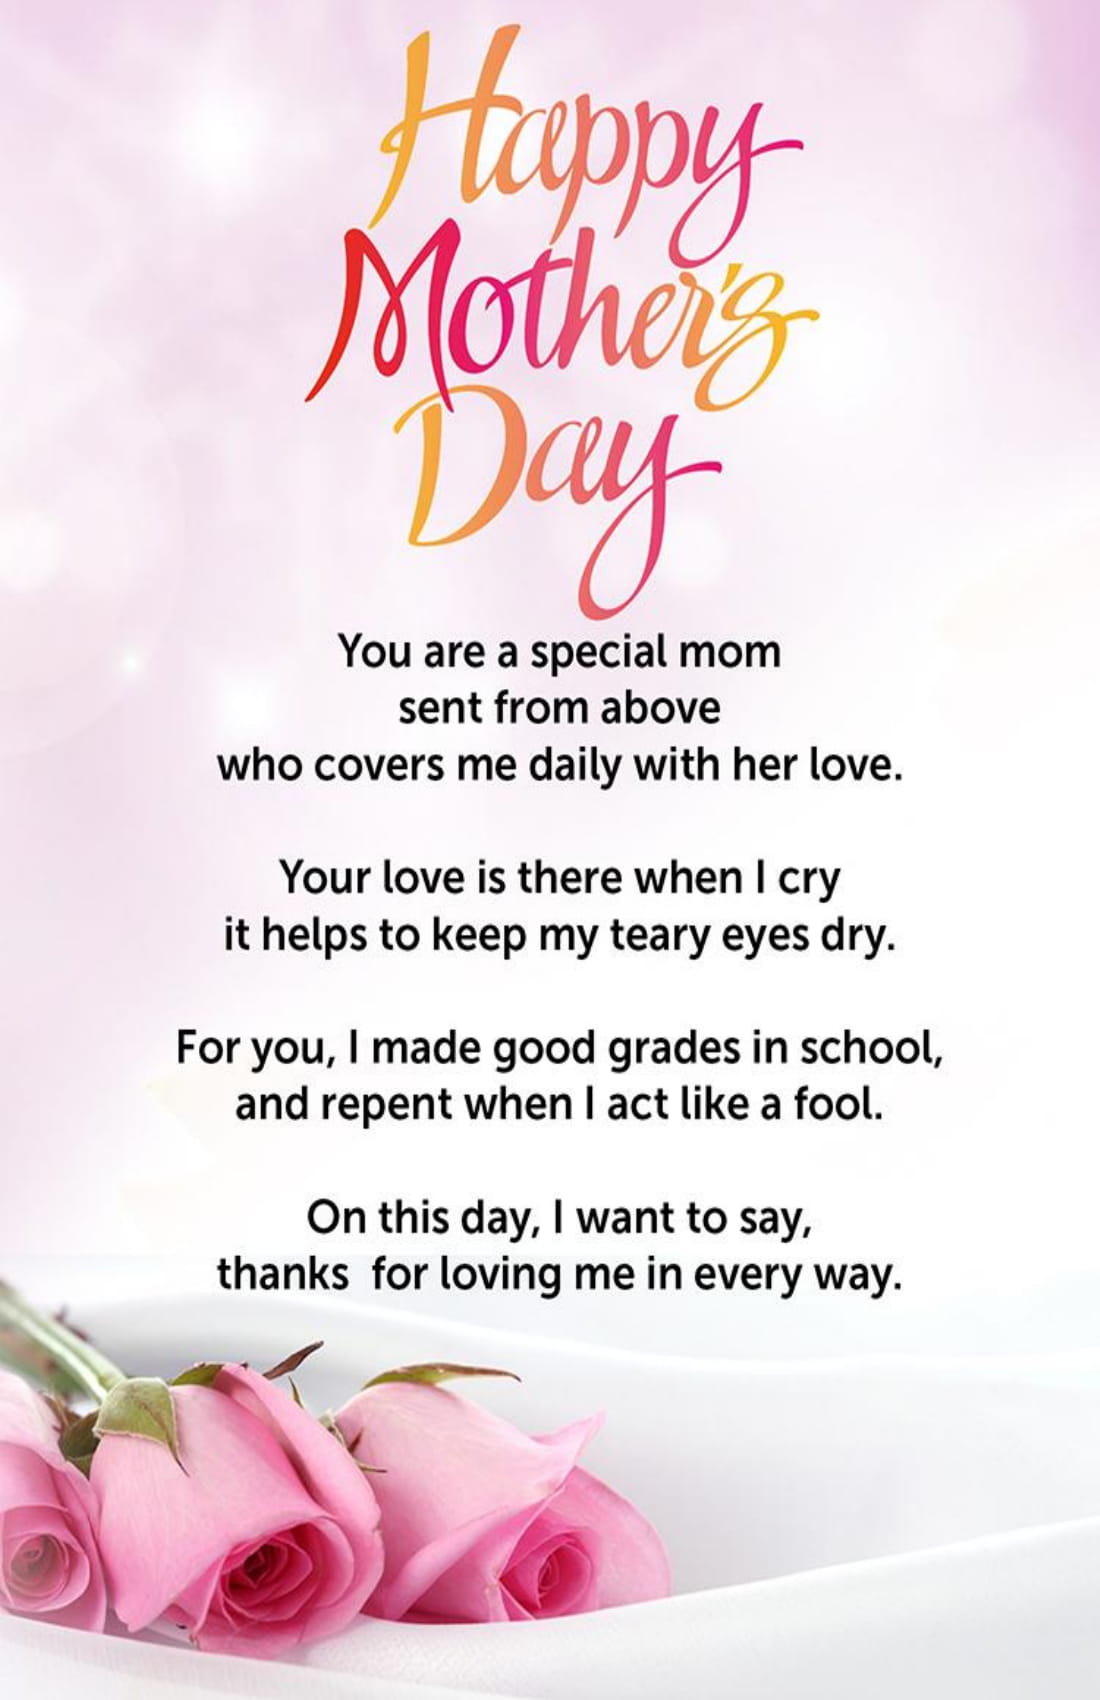 printable-mother-s-day-note-that-doubles-as-a-coloring-sheet-that-your